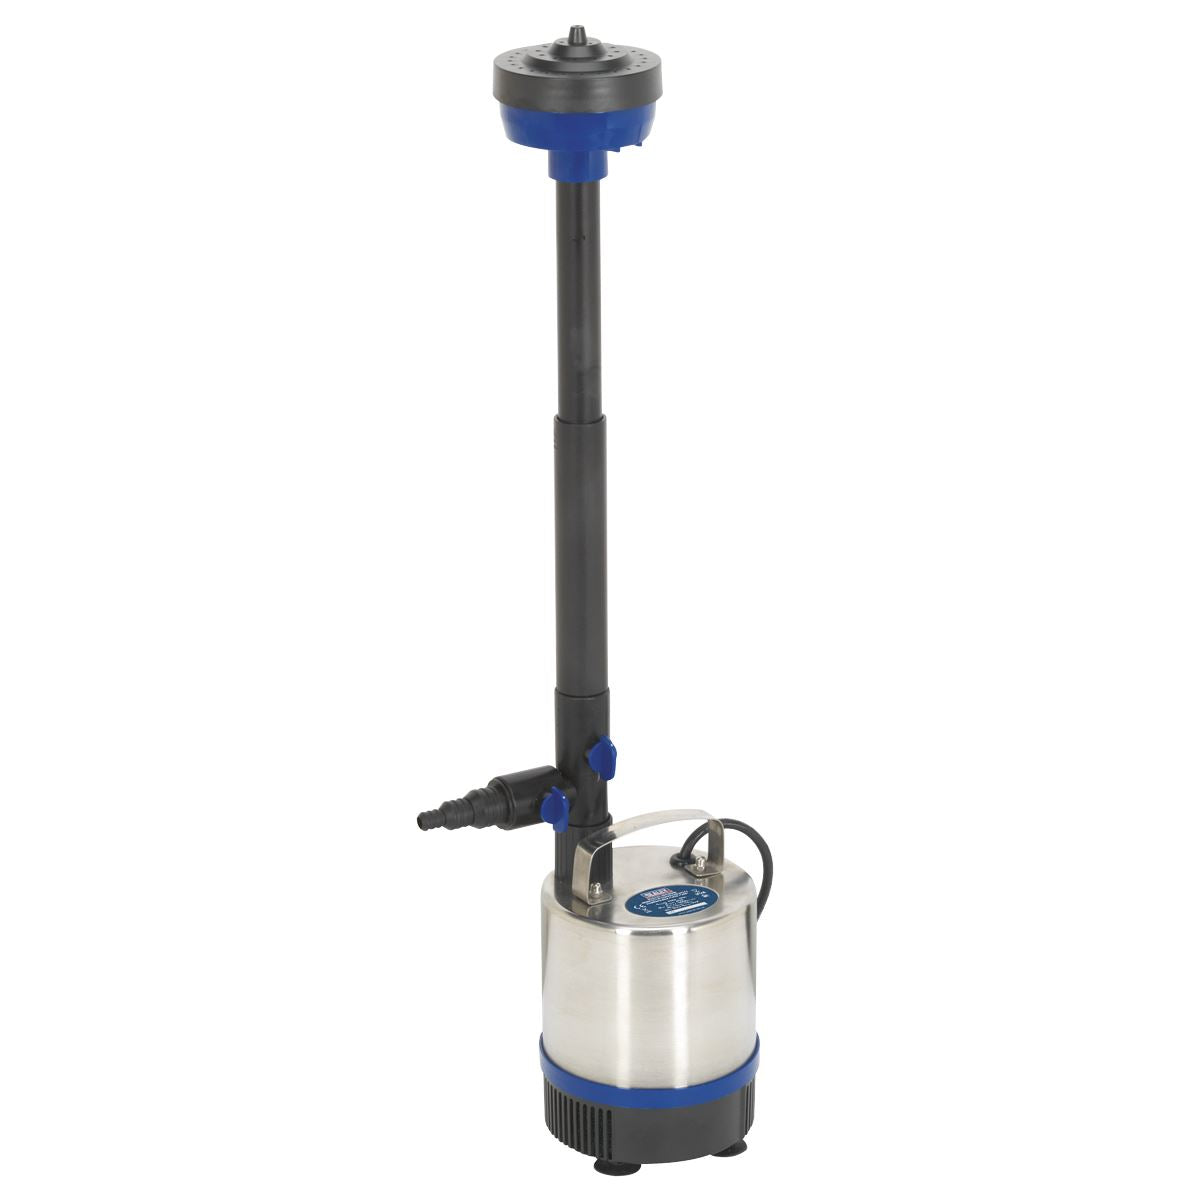 Sealey Submersible Pond Pump Stainless Steel 3000L/hr 230V